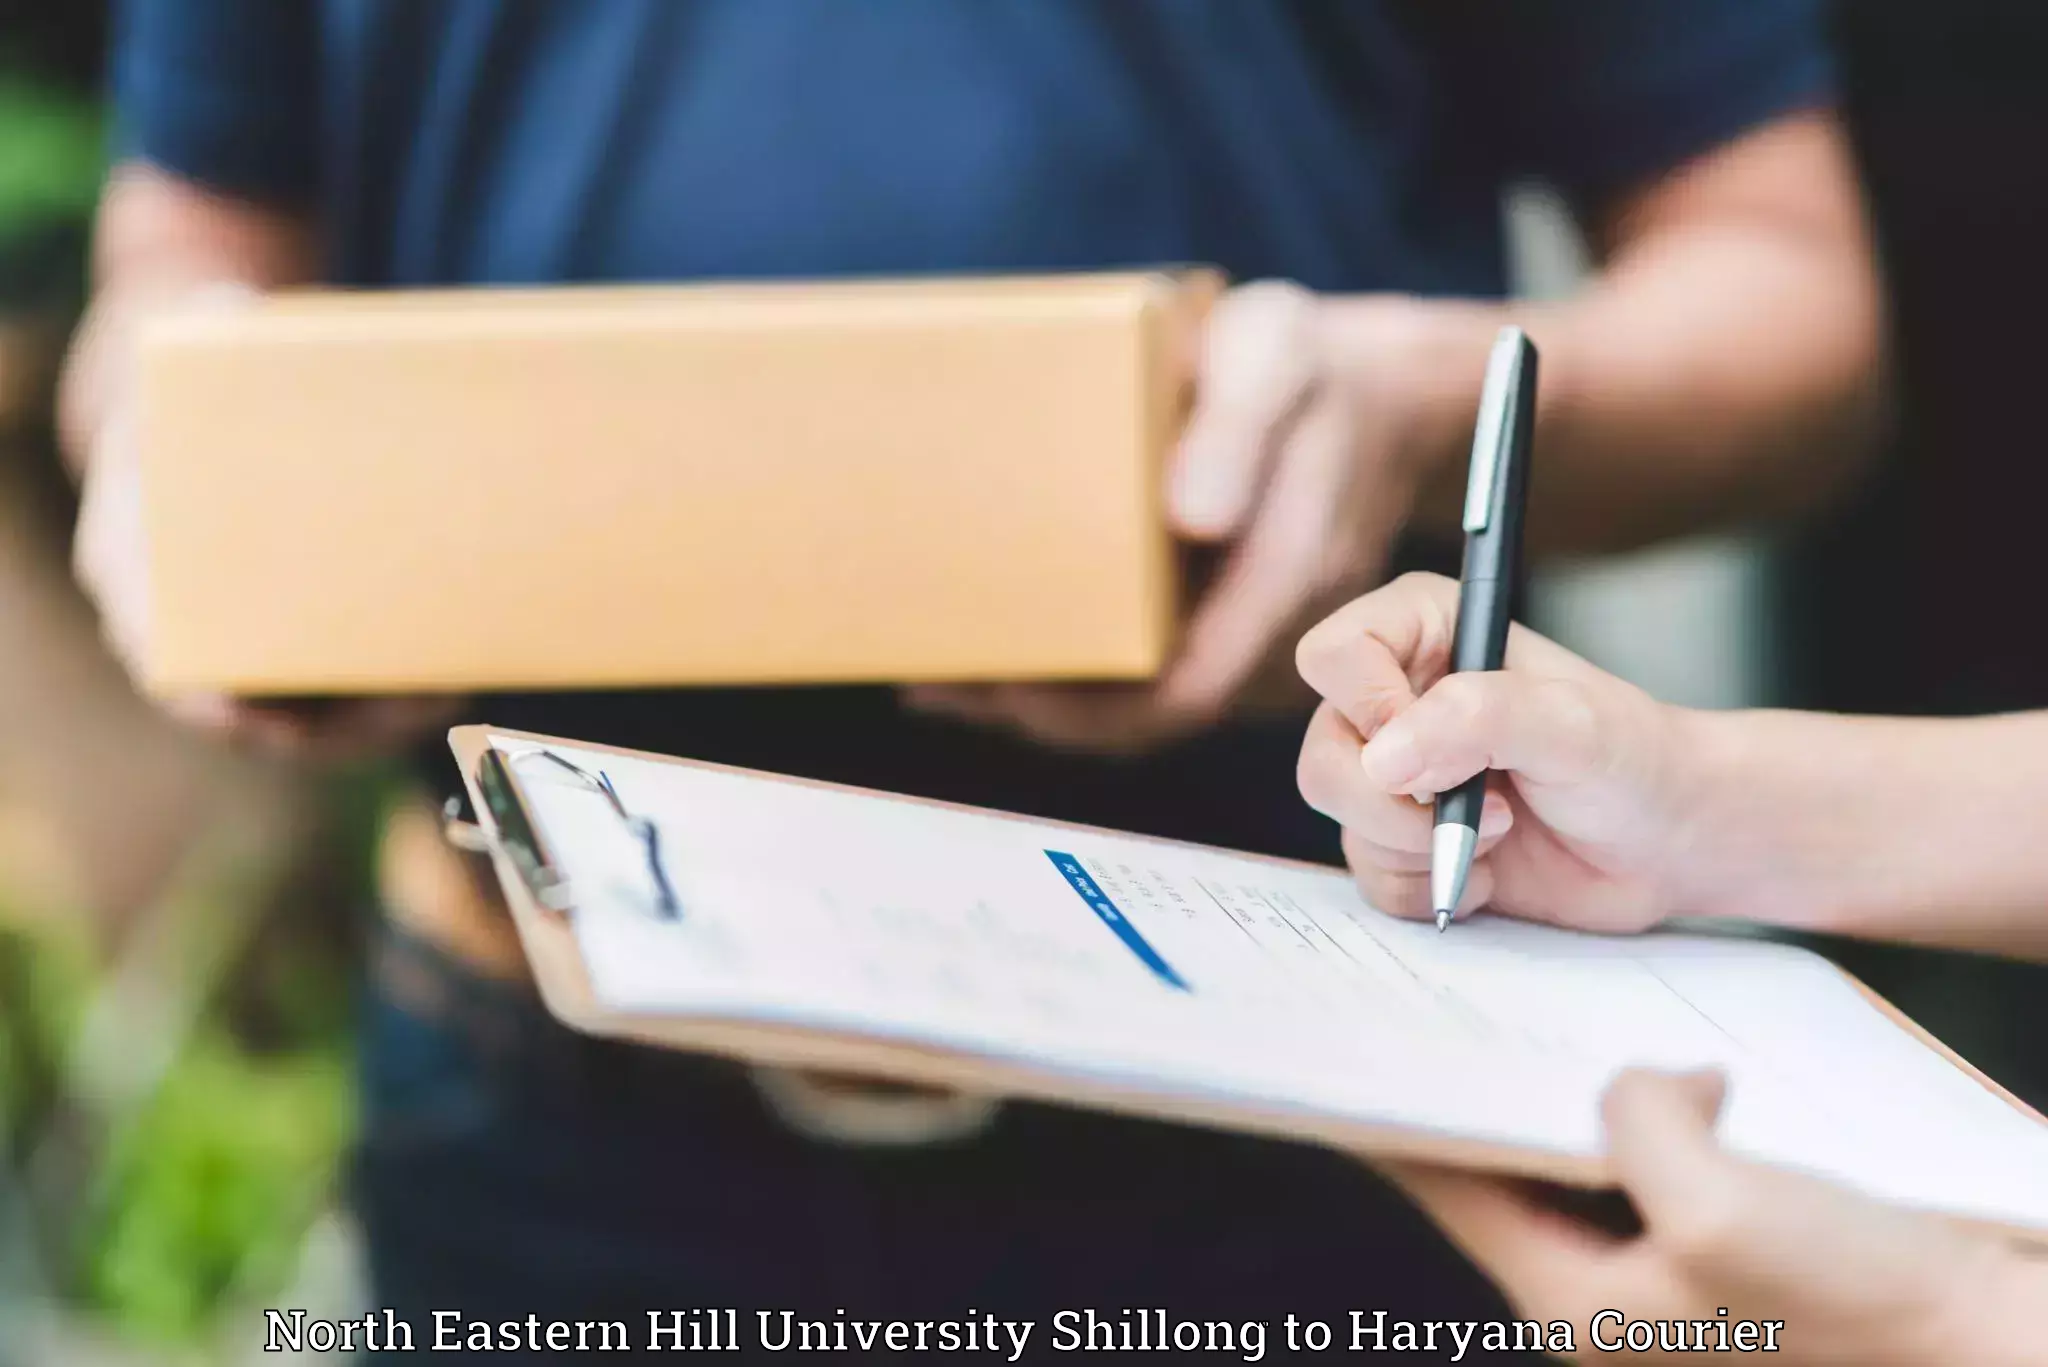 Quality relocation services North Eastern Hill University Shillong to Bilaspur Haryana